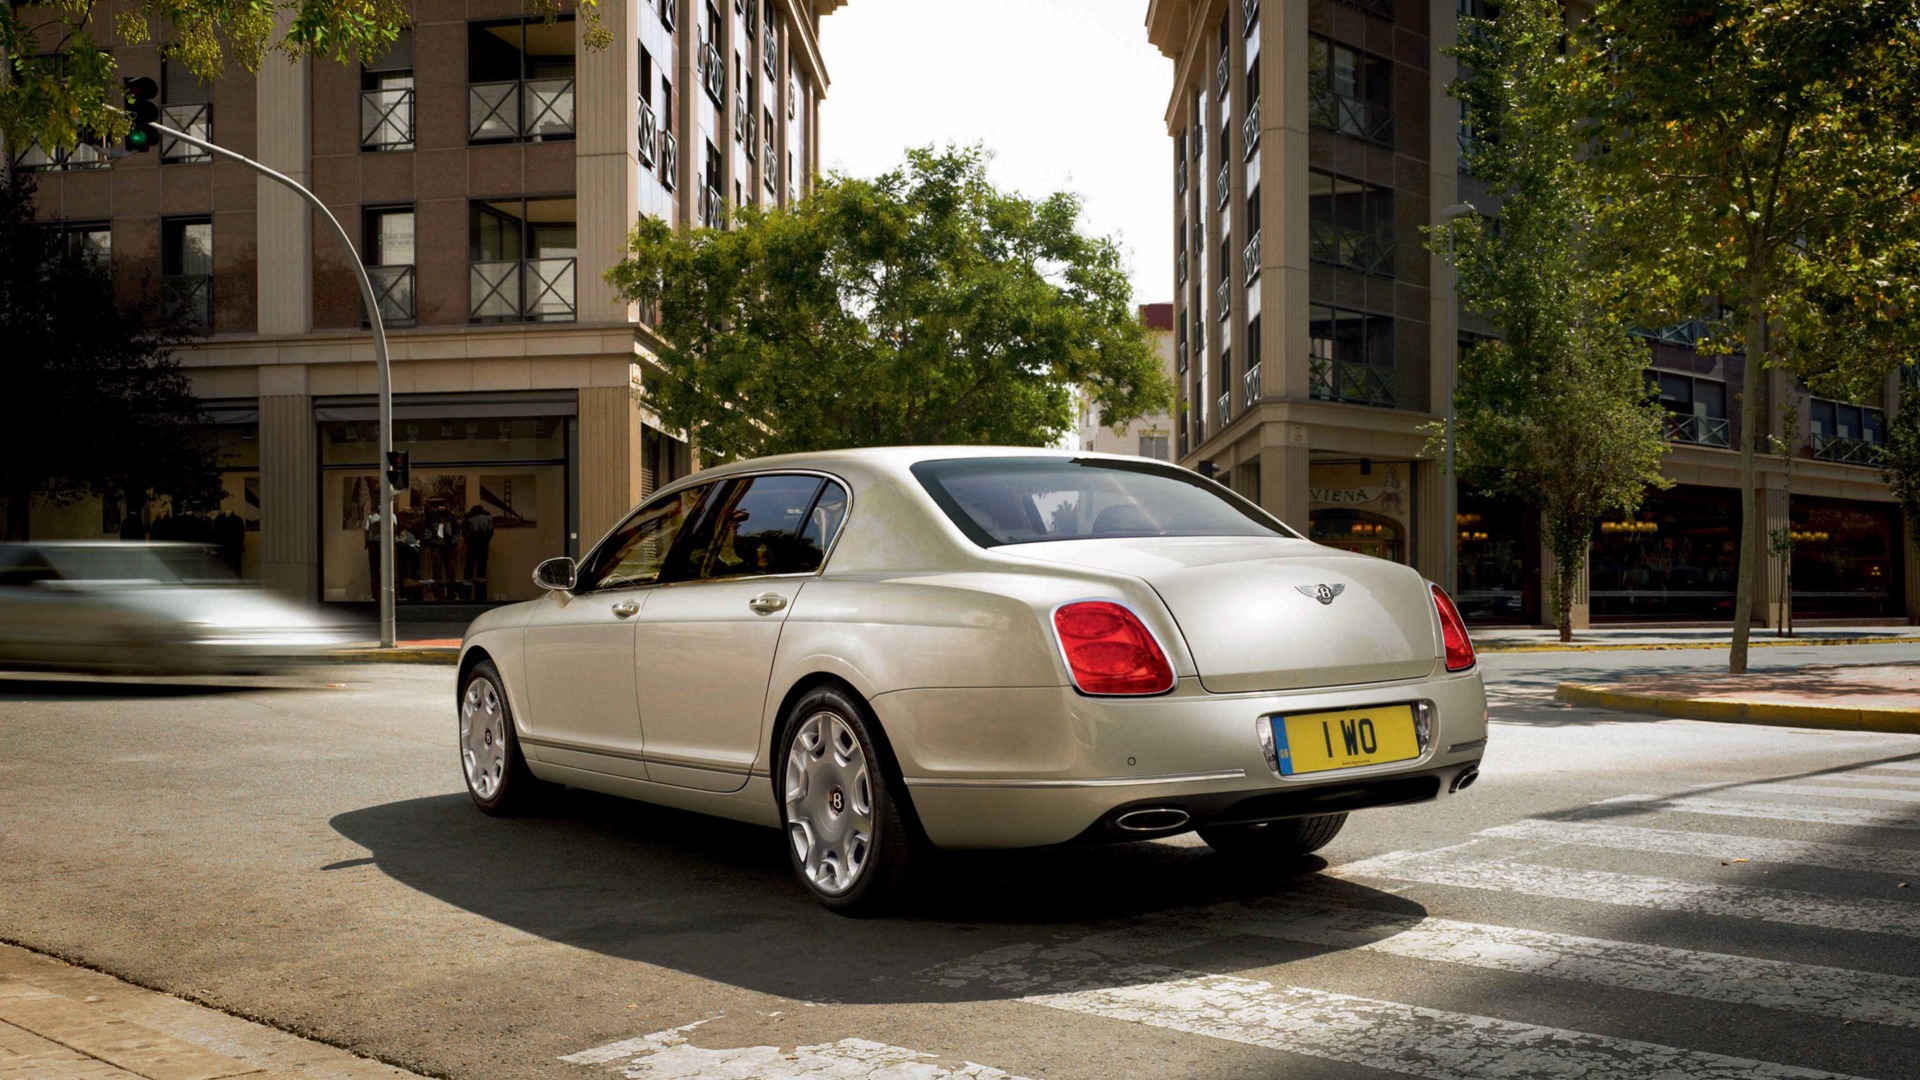 Bentley Continental Flying Spur - 2008 賓利 #6 - 1920x1080